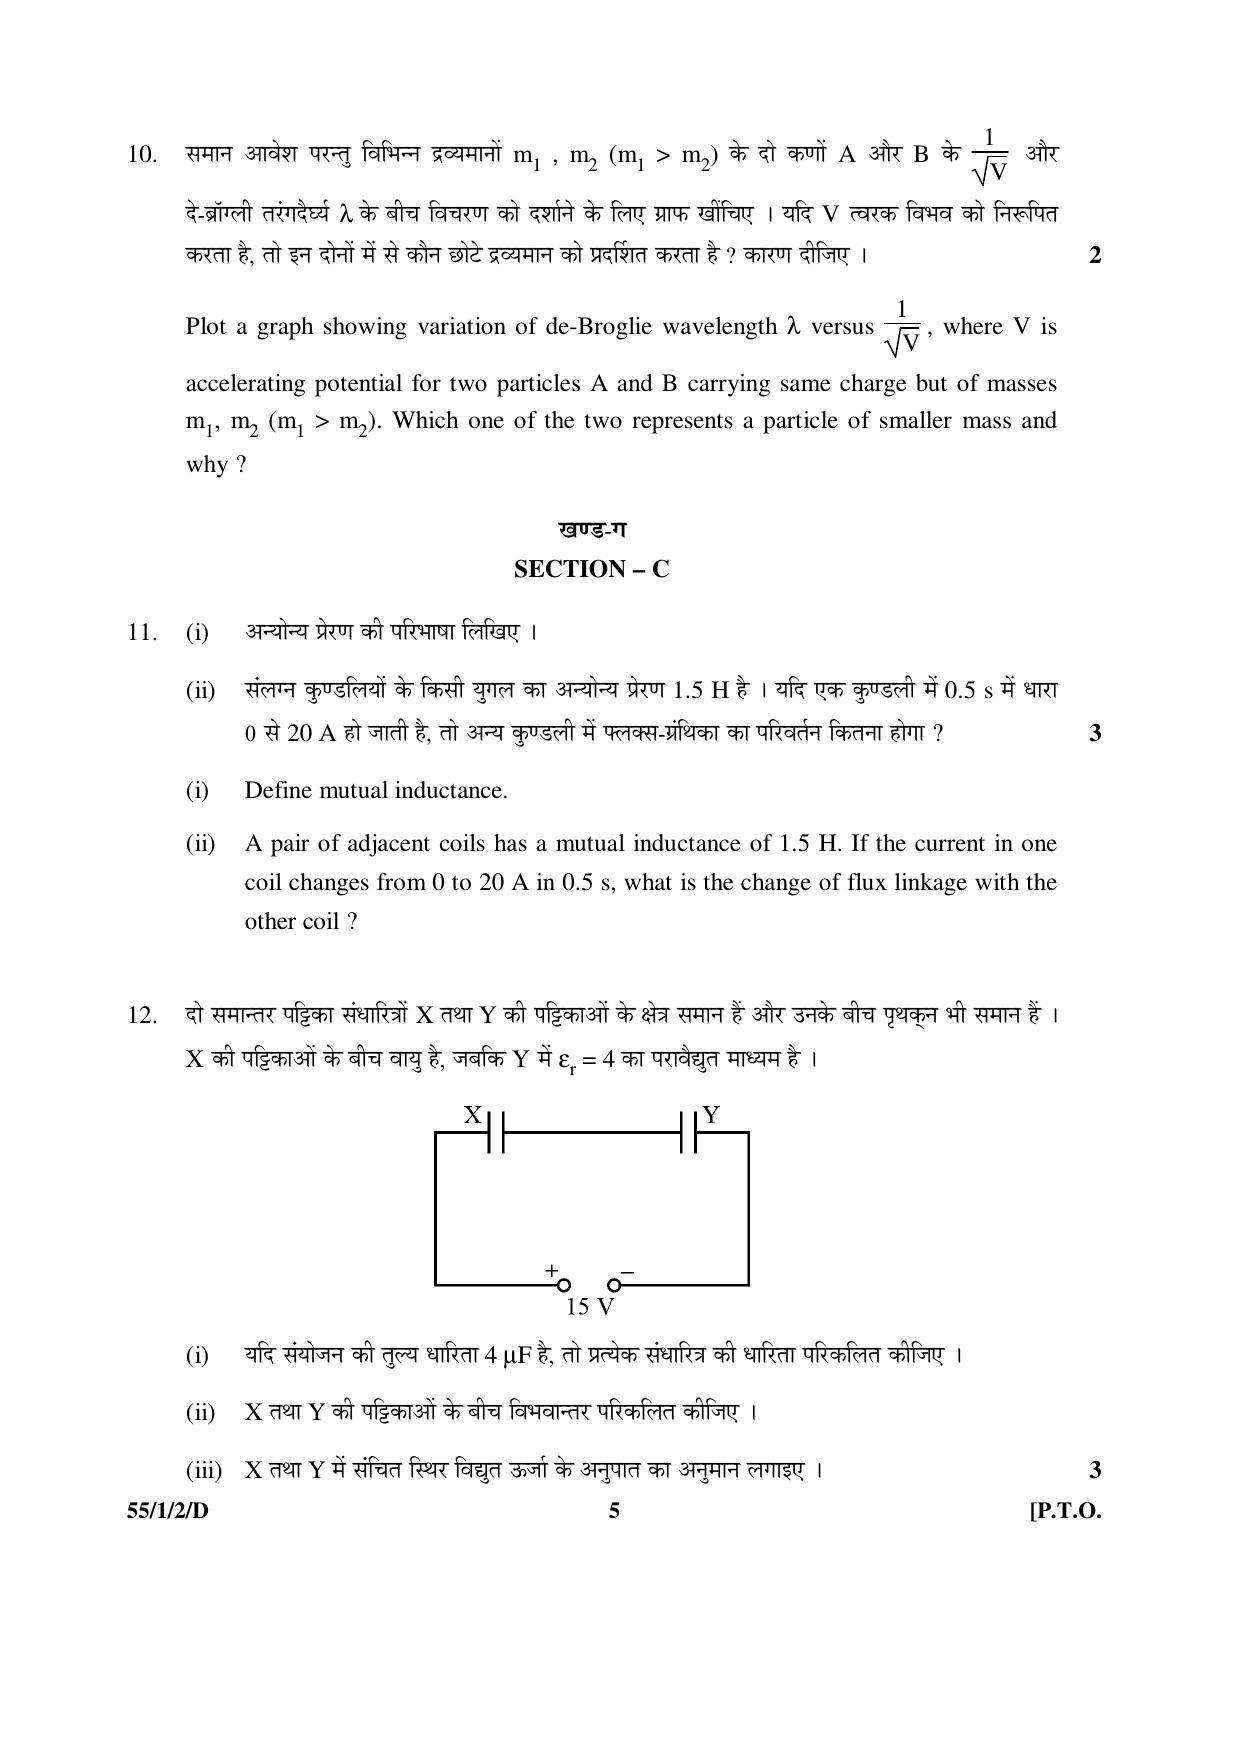 CBSE Class 12 55-1-2-D PHYSICS 2016 Question Paper - Page 5